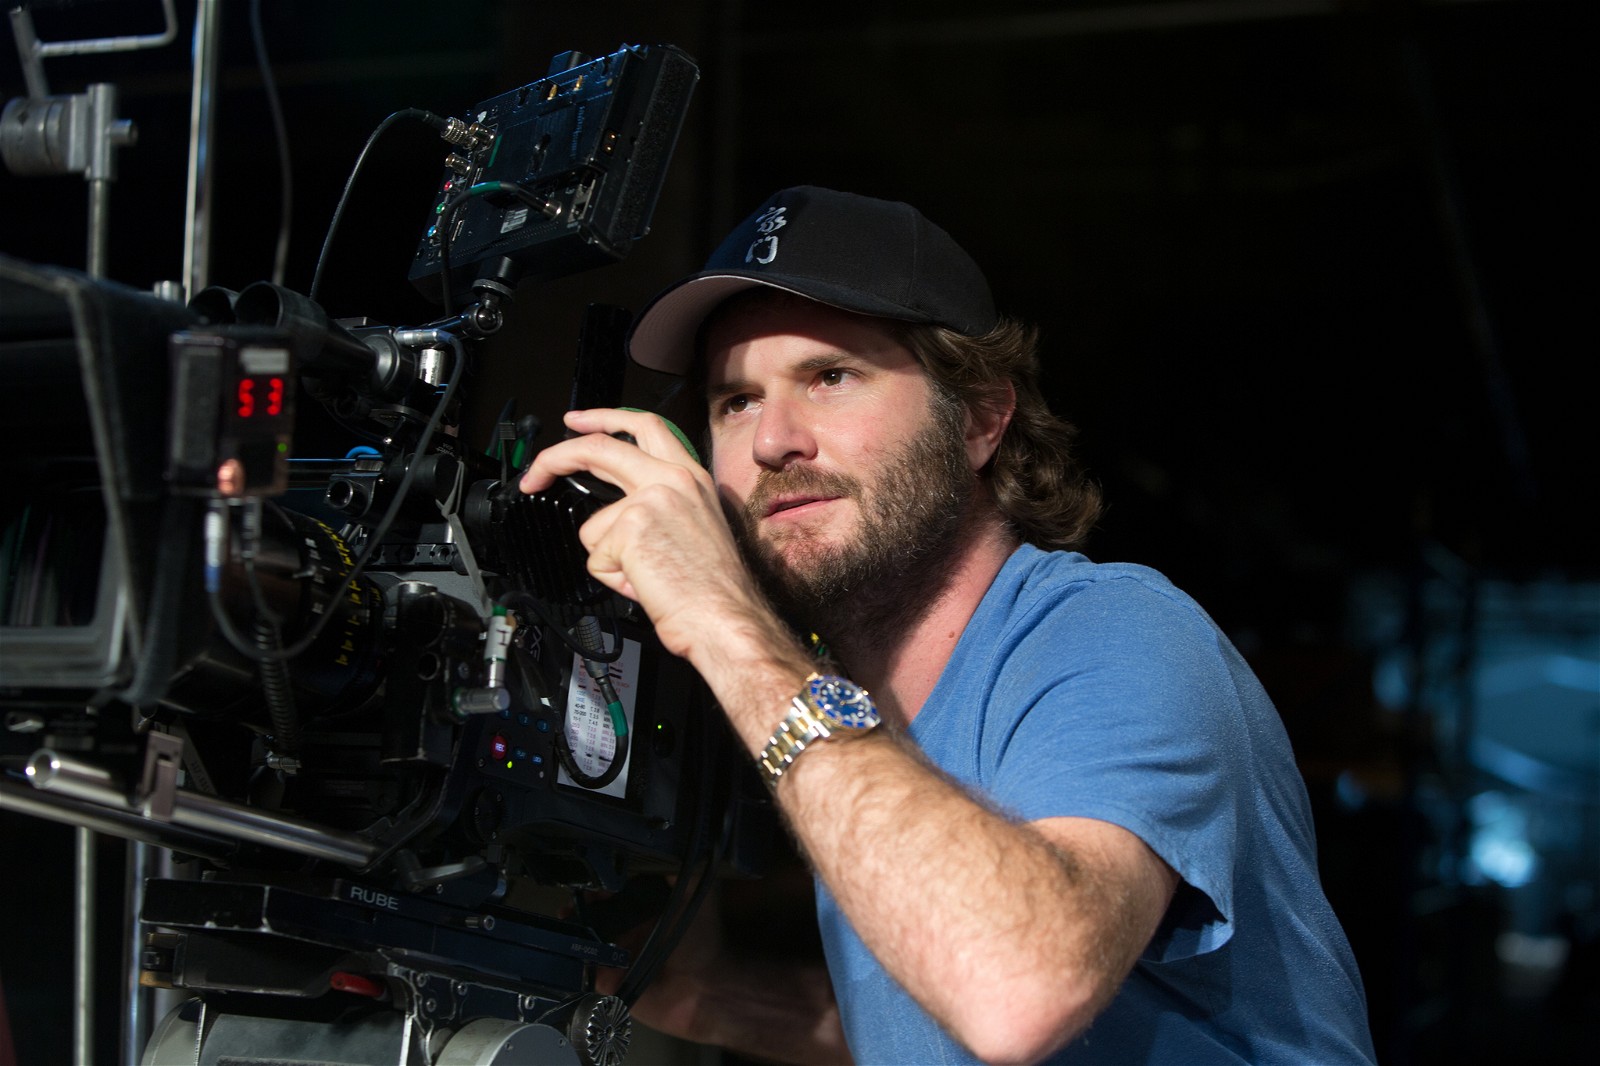 Director Jonathan Liebesman on the set of TEENAGE MUTANT NINJA TURTLES, from Paramount Pictures and Nickelodeon Movies.